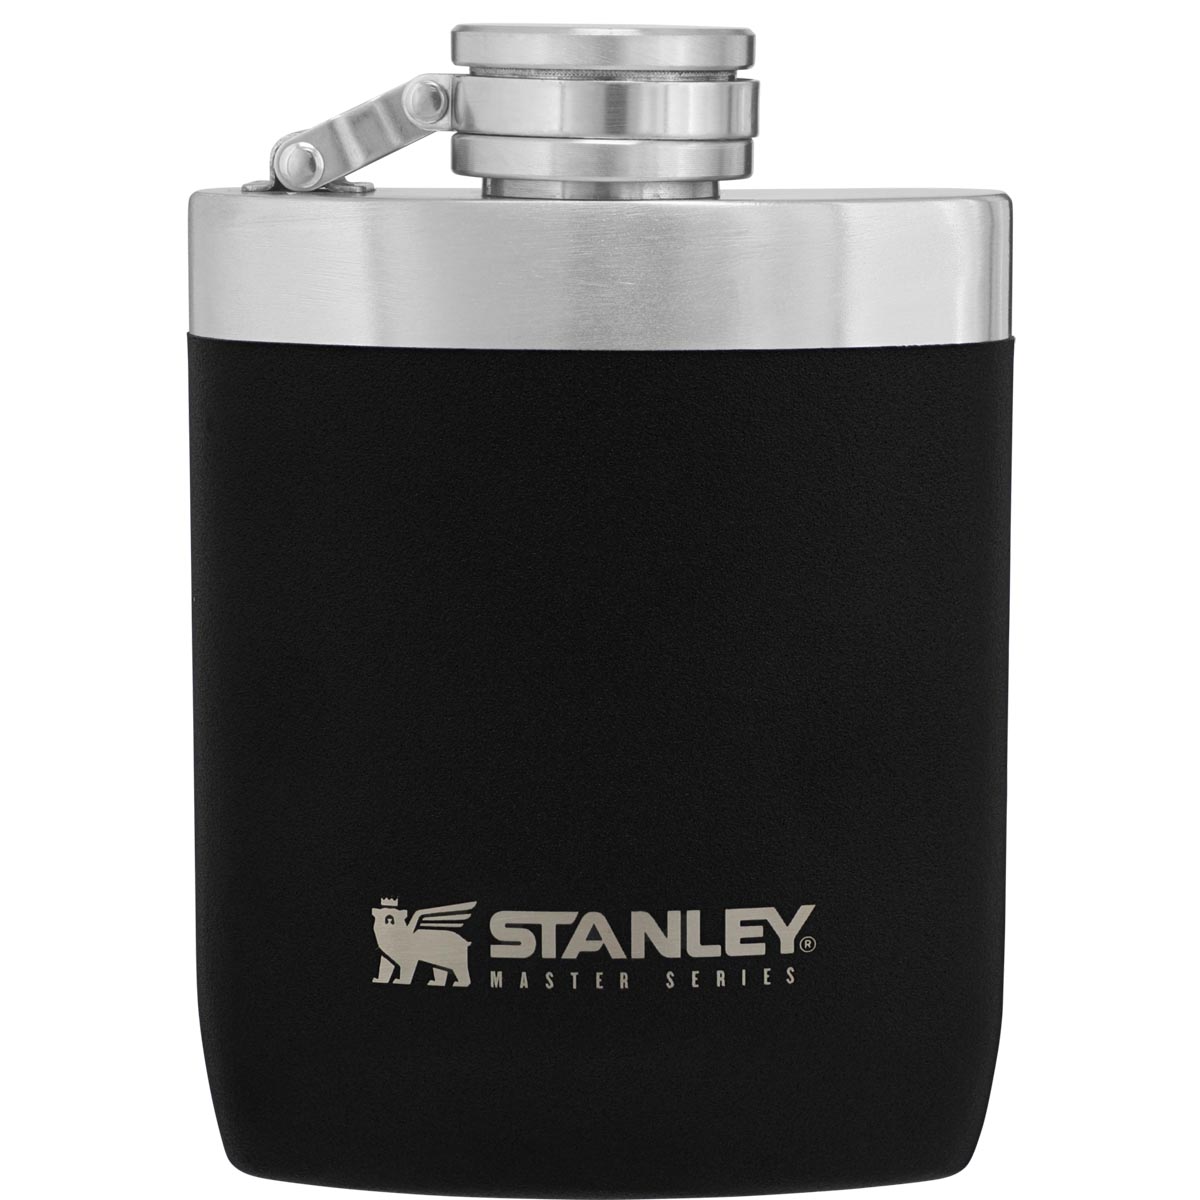 http://www.getzs.com/images/products/107979/full_hipflask_black.jpg